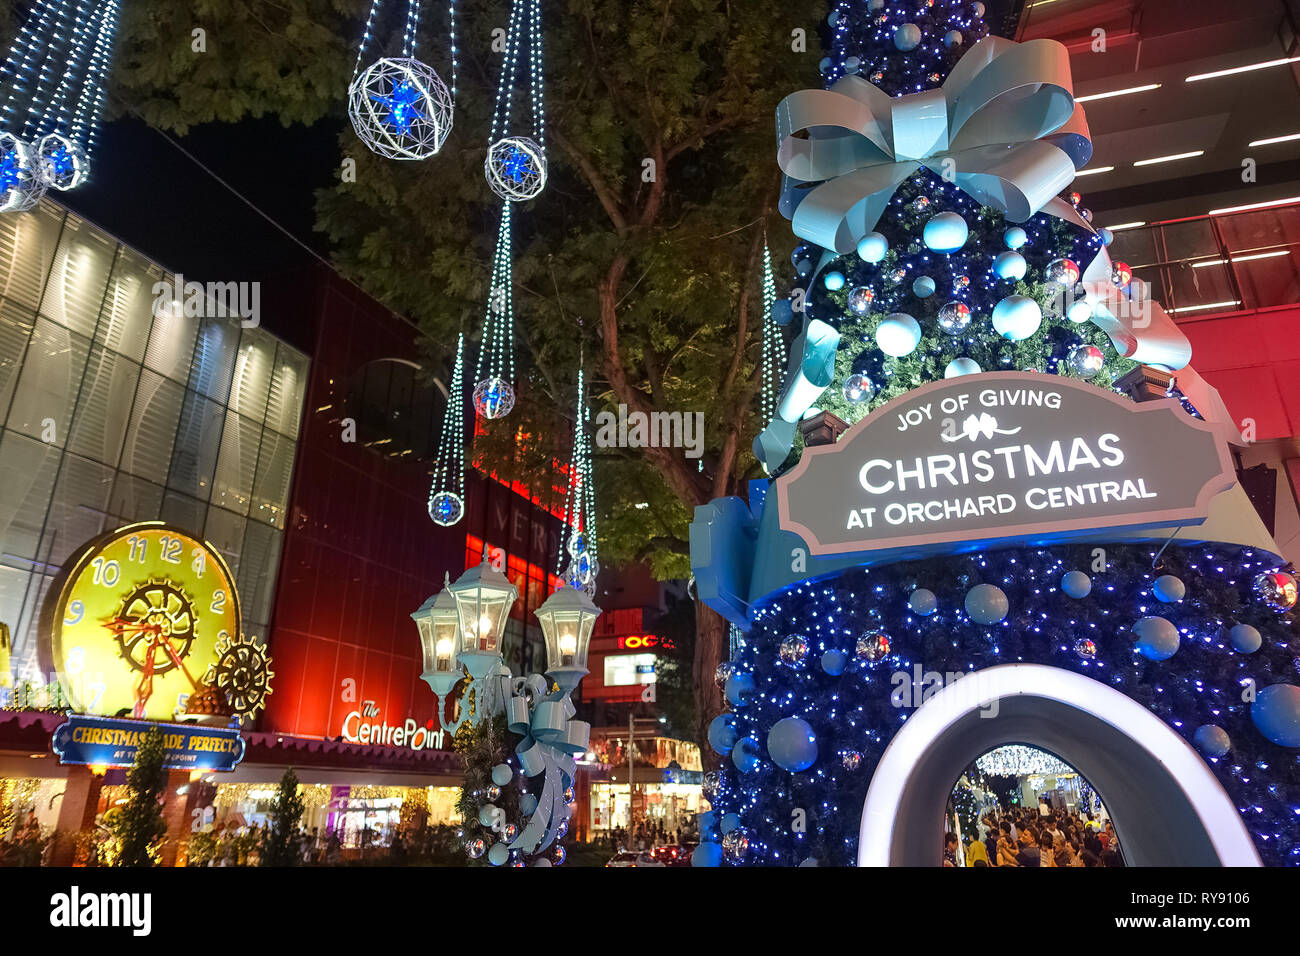 7 Best Places To See Christmas Lights And Decorations In Singapore